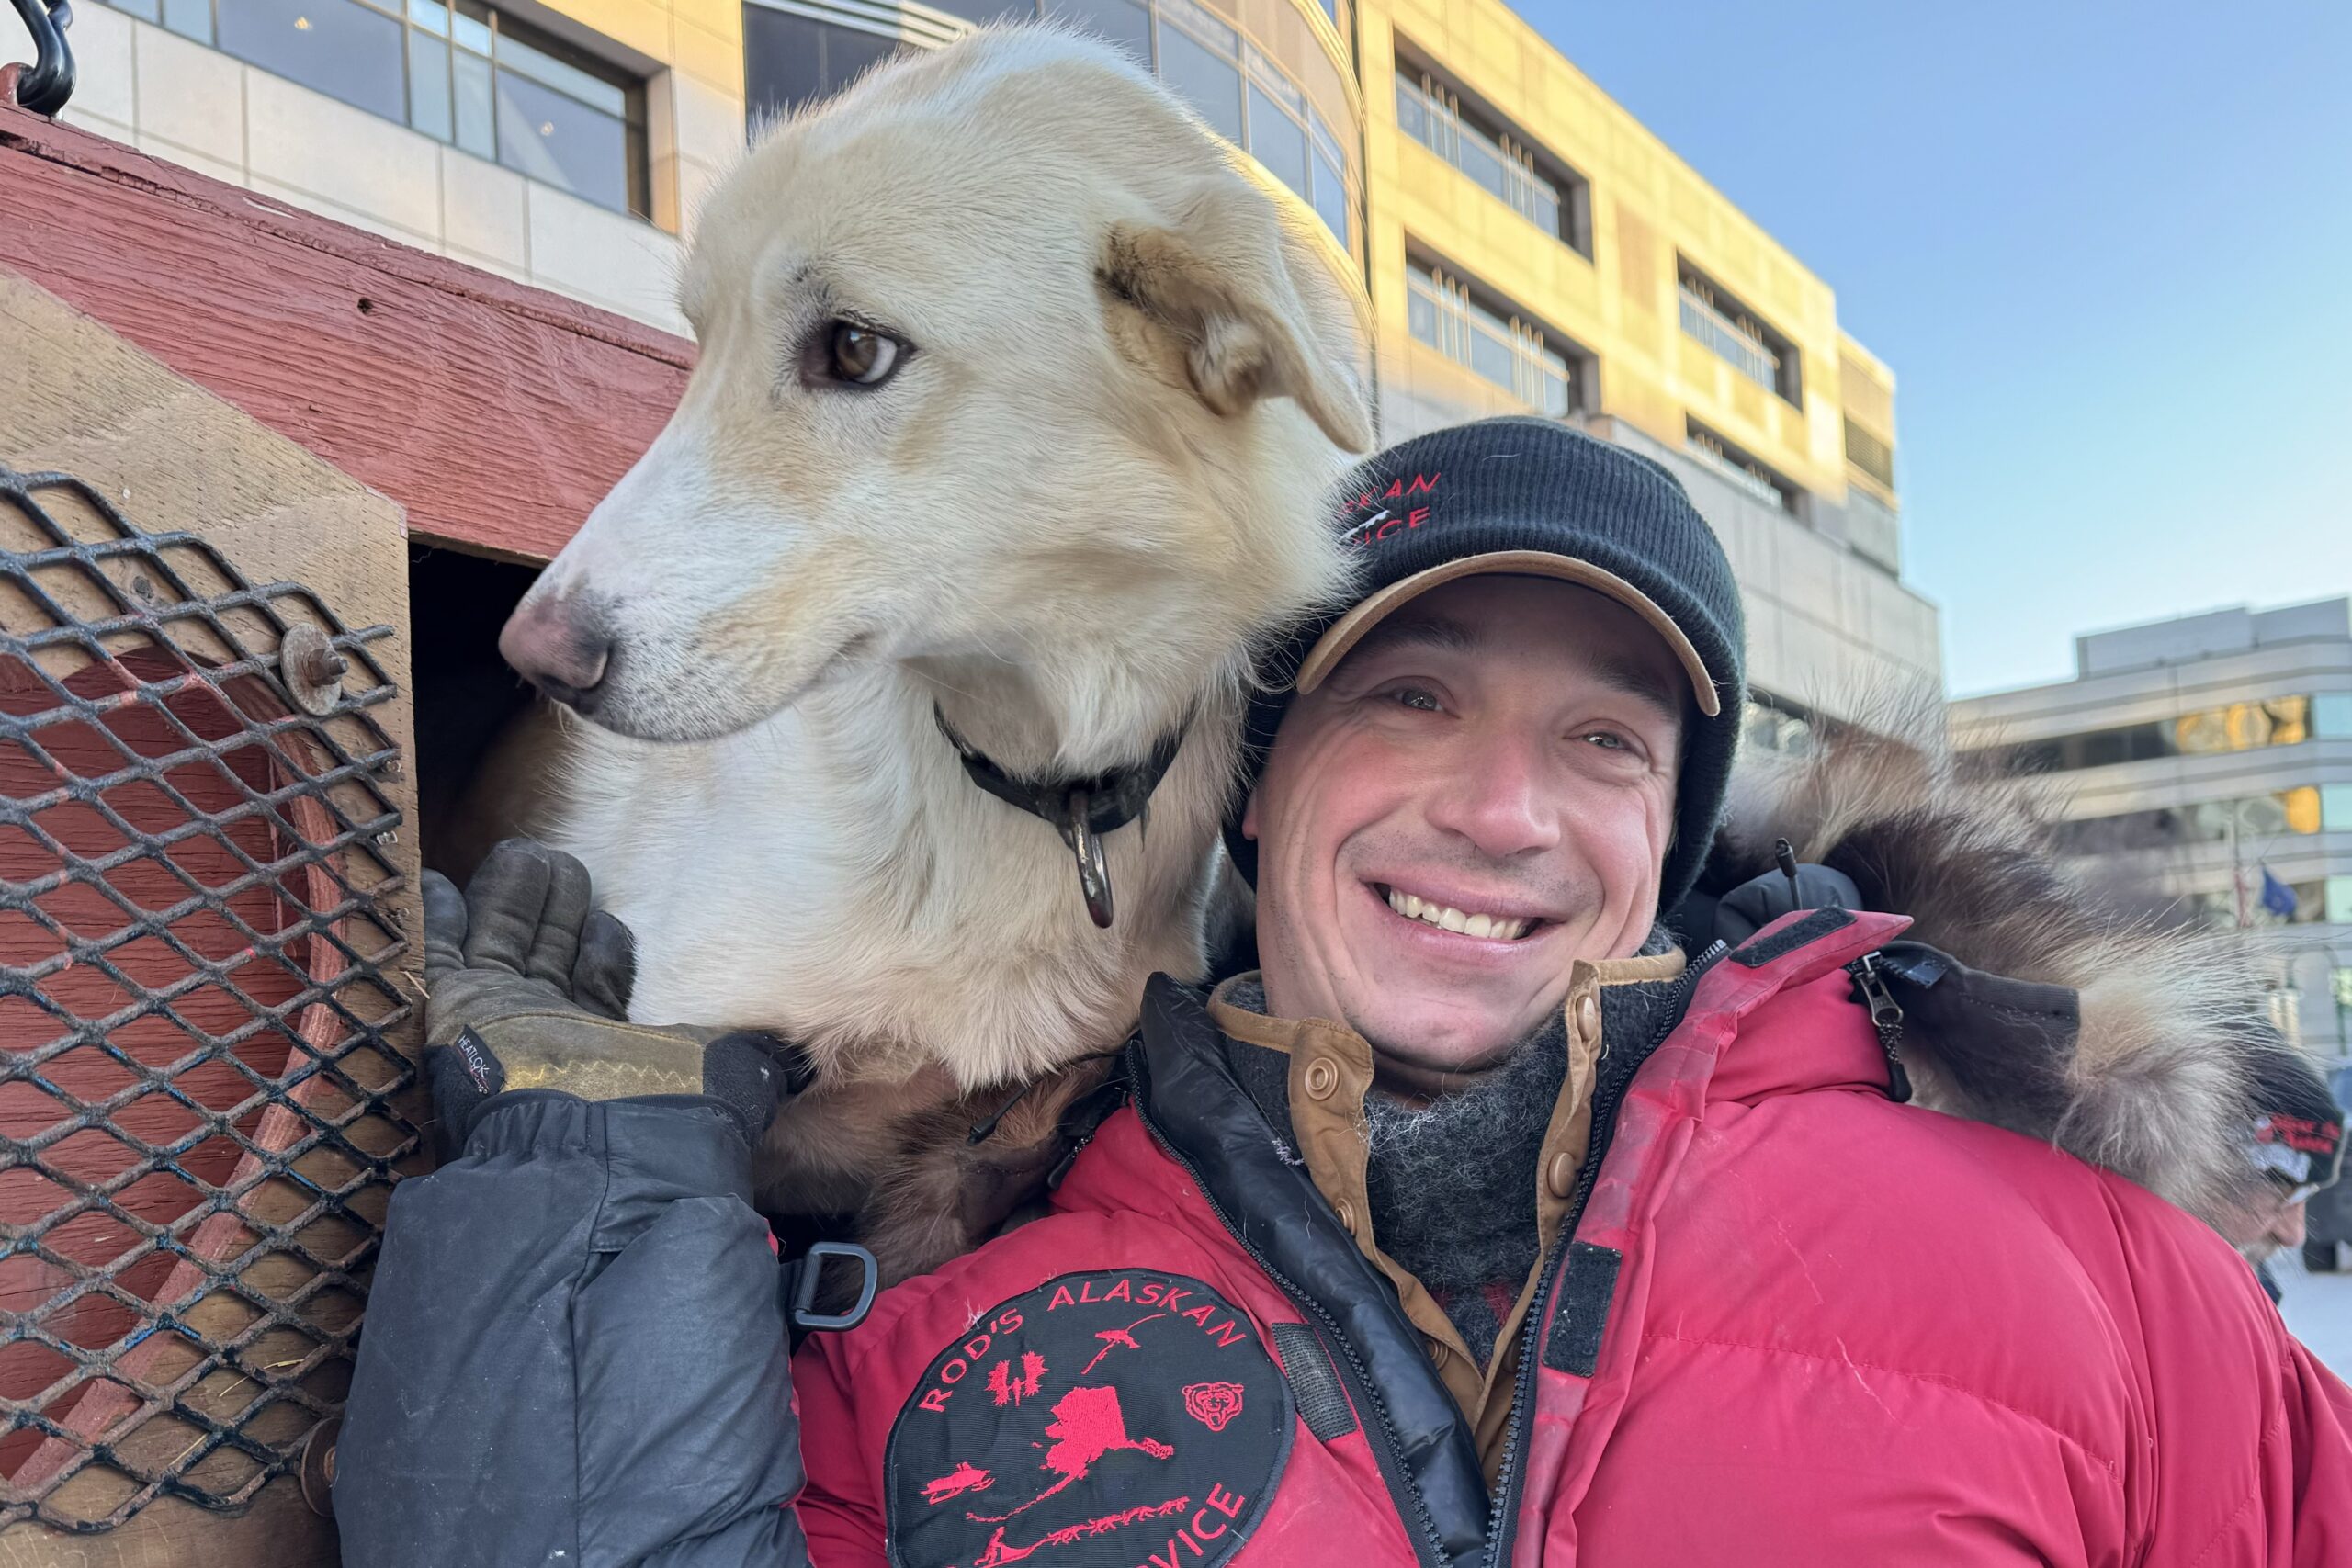 a musher poses with a blonde dog outside